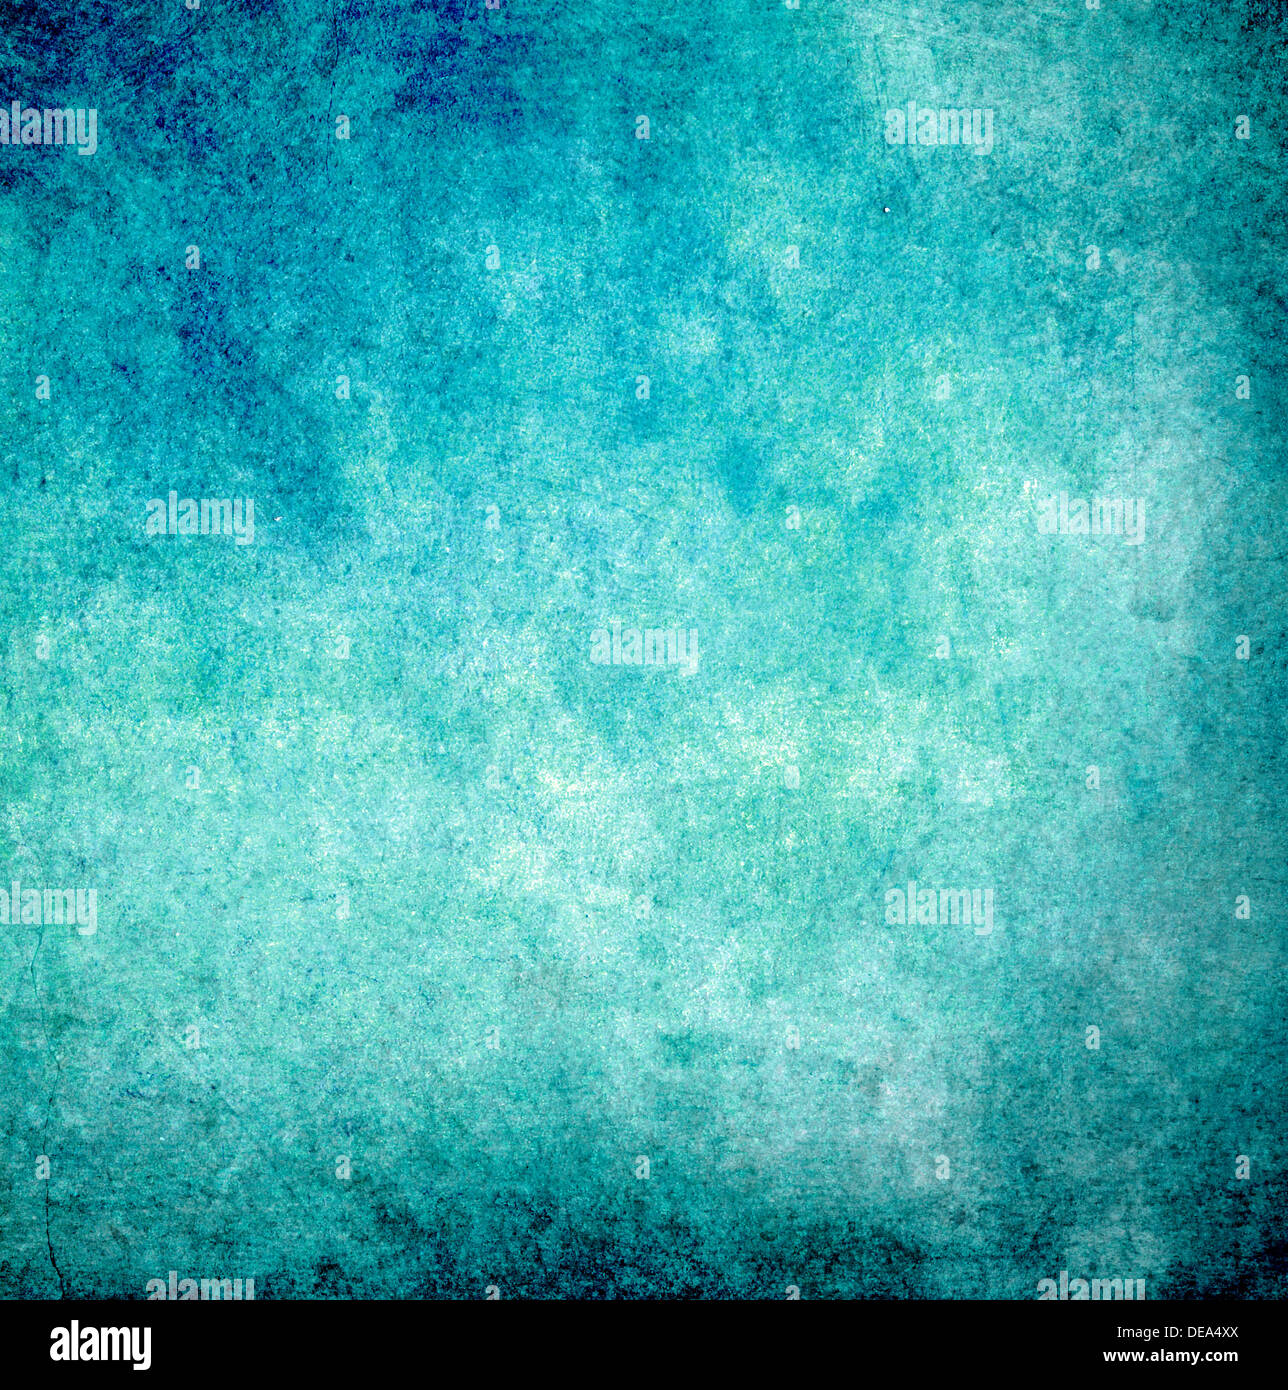 Cyan blue paint wall background or texture Stock Photo - Alamy